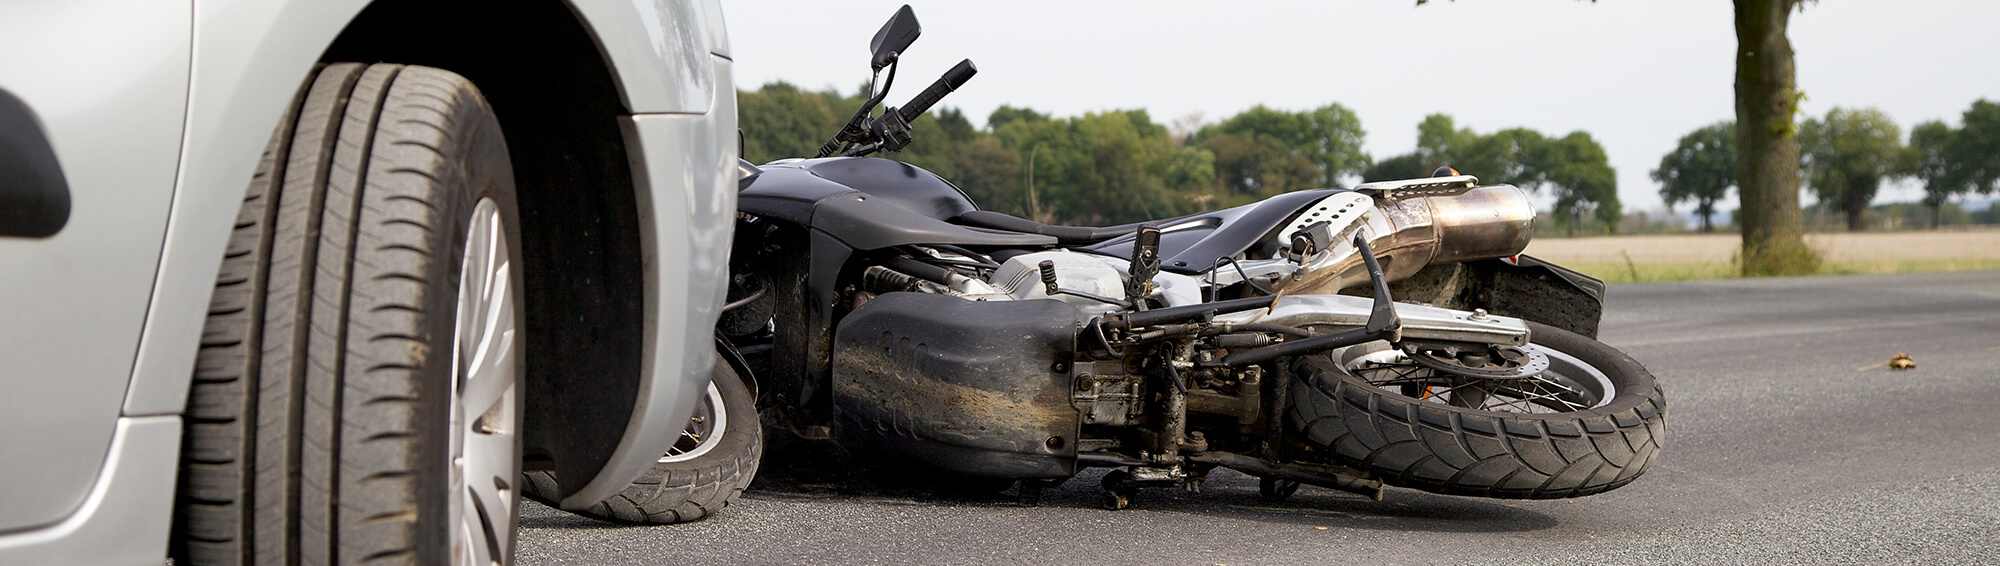 2 Common Motorcycle Accident Causes